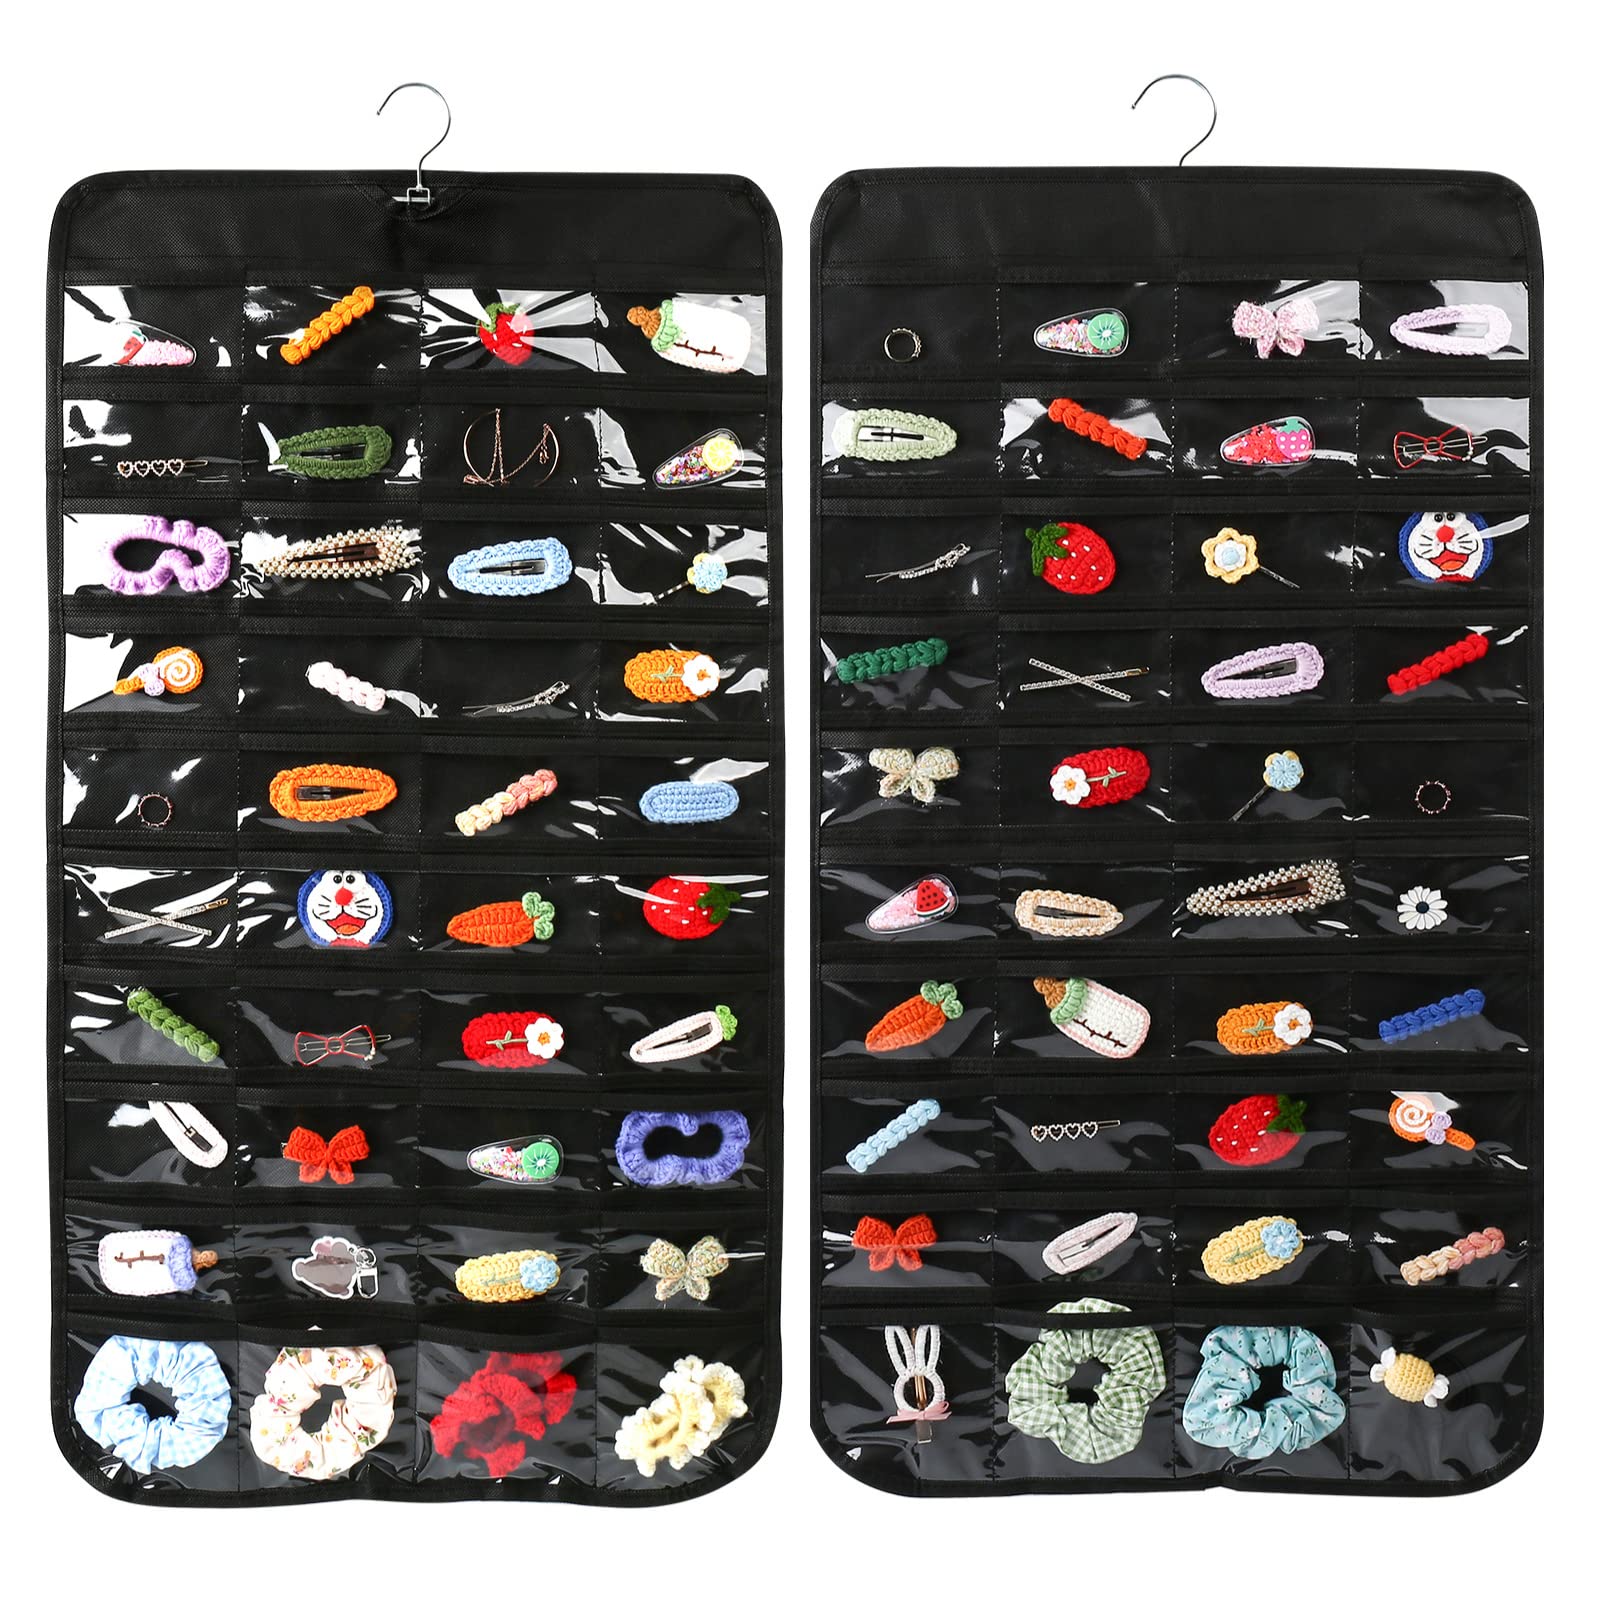 Luney Hanging Jewelry Organizer, 80 Pockets Earring Holder Organizer, Bracelet Organizer with Pockets for Woman, for Hanging Ear